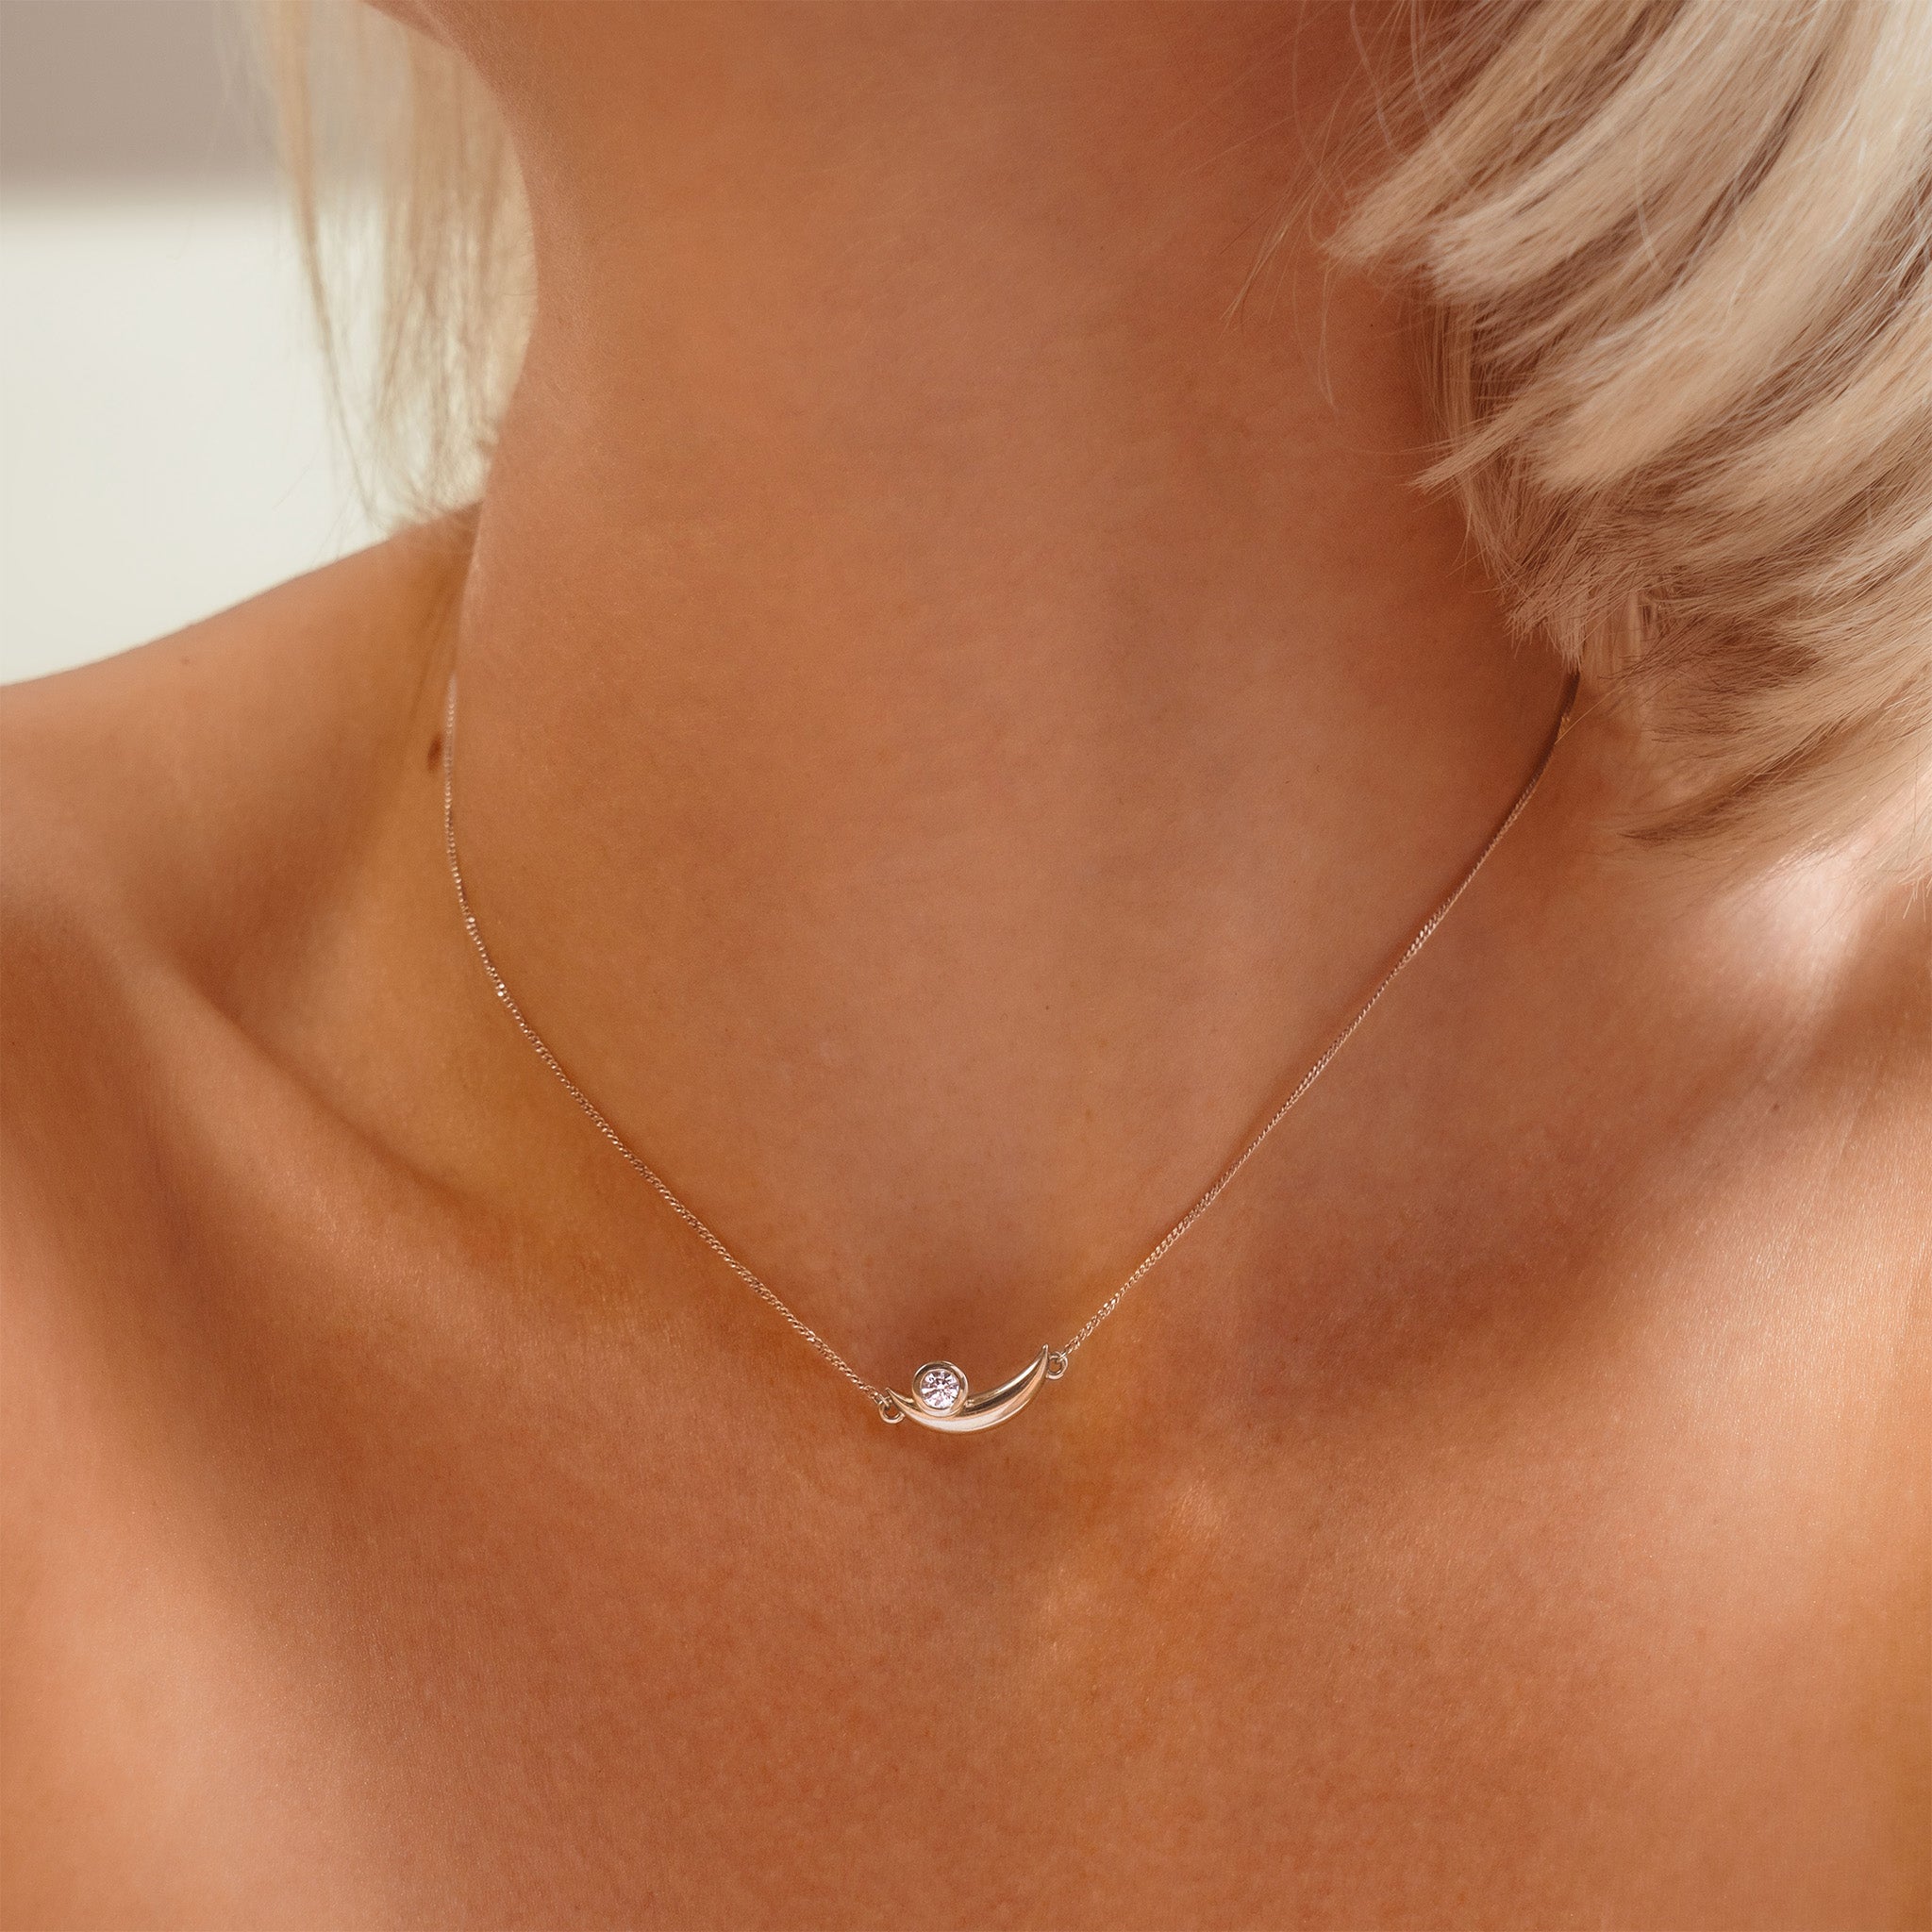 solid white gold crescent necklace with diamond on neck - AIANA jewellery Australia